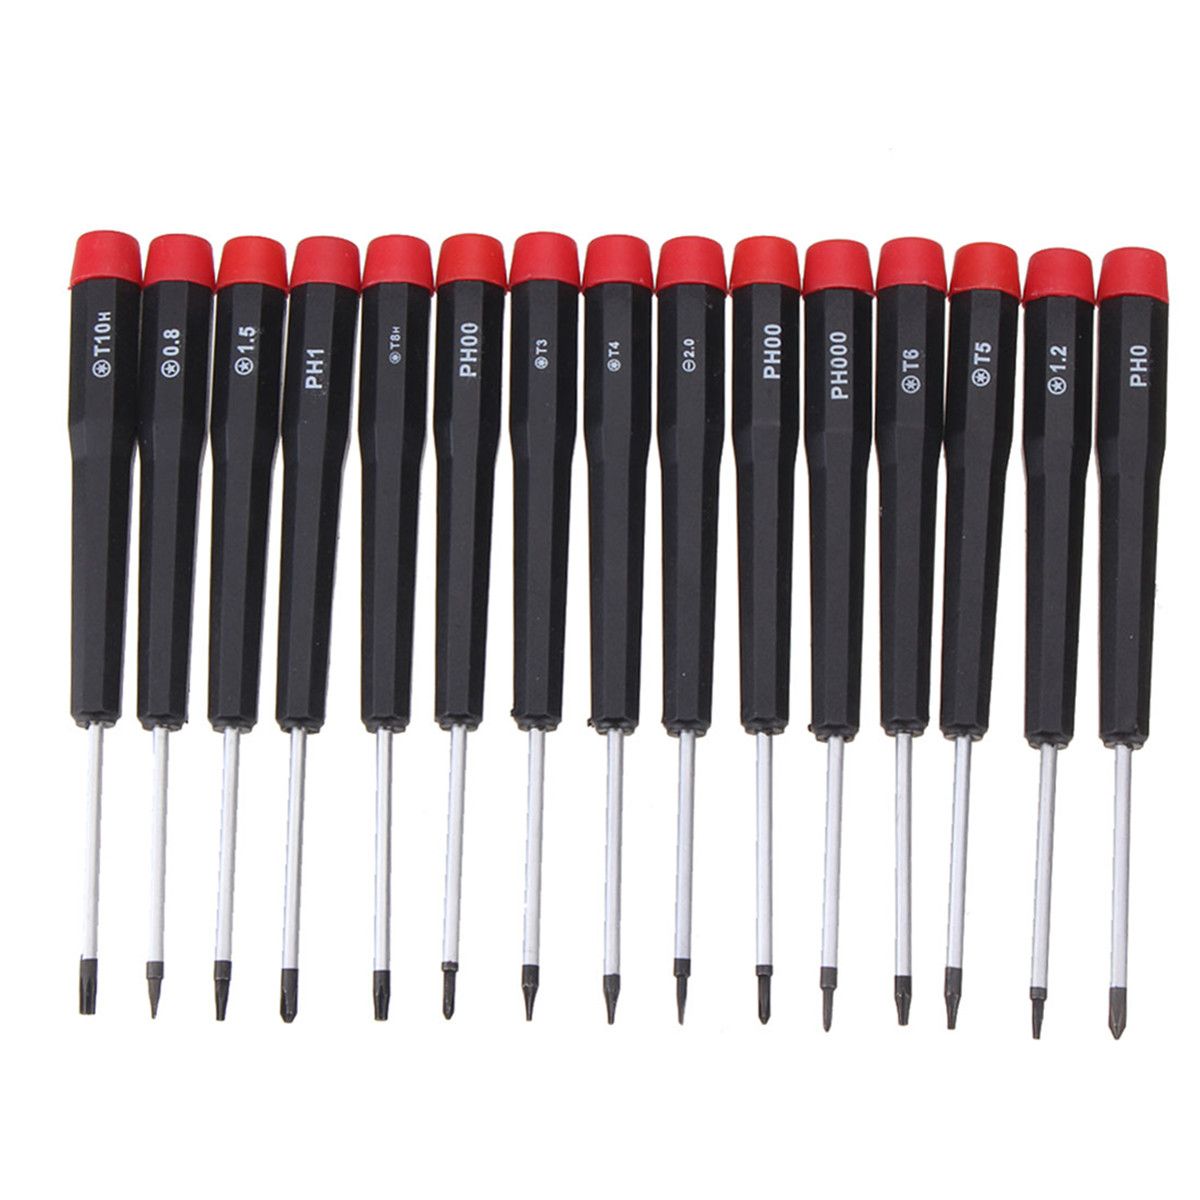 27-in-1-Cell-Phone-Repair-Opening-Tools-Kit-Set-Pry-Screwdriver-For-Samsung-Apple-Mobile-Phone-1322477